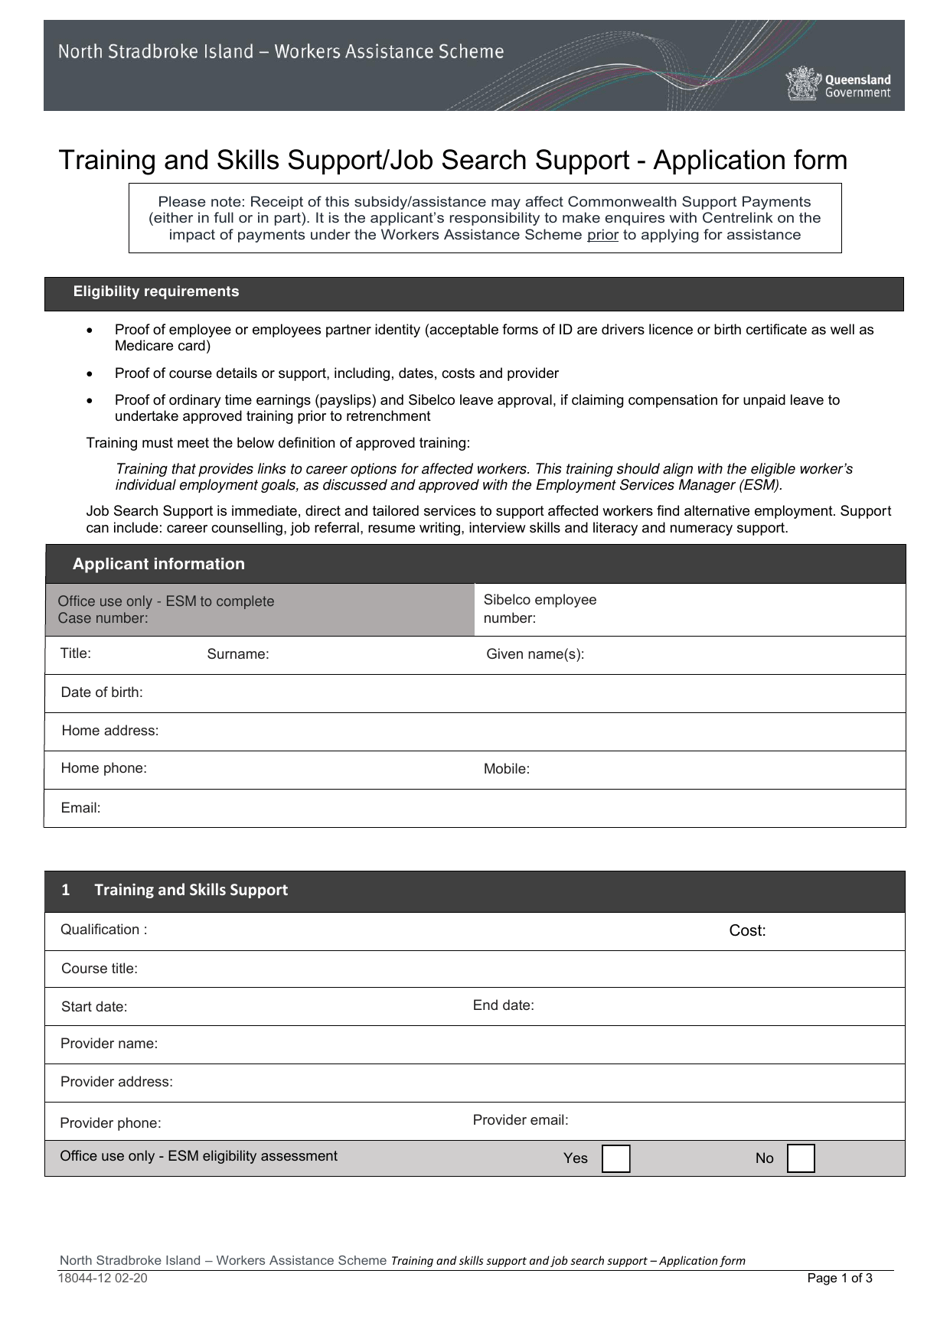 Form 18044-12 Training and Skills Support / Job Search Support - Application Form - Queensland, Australia, Page 1